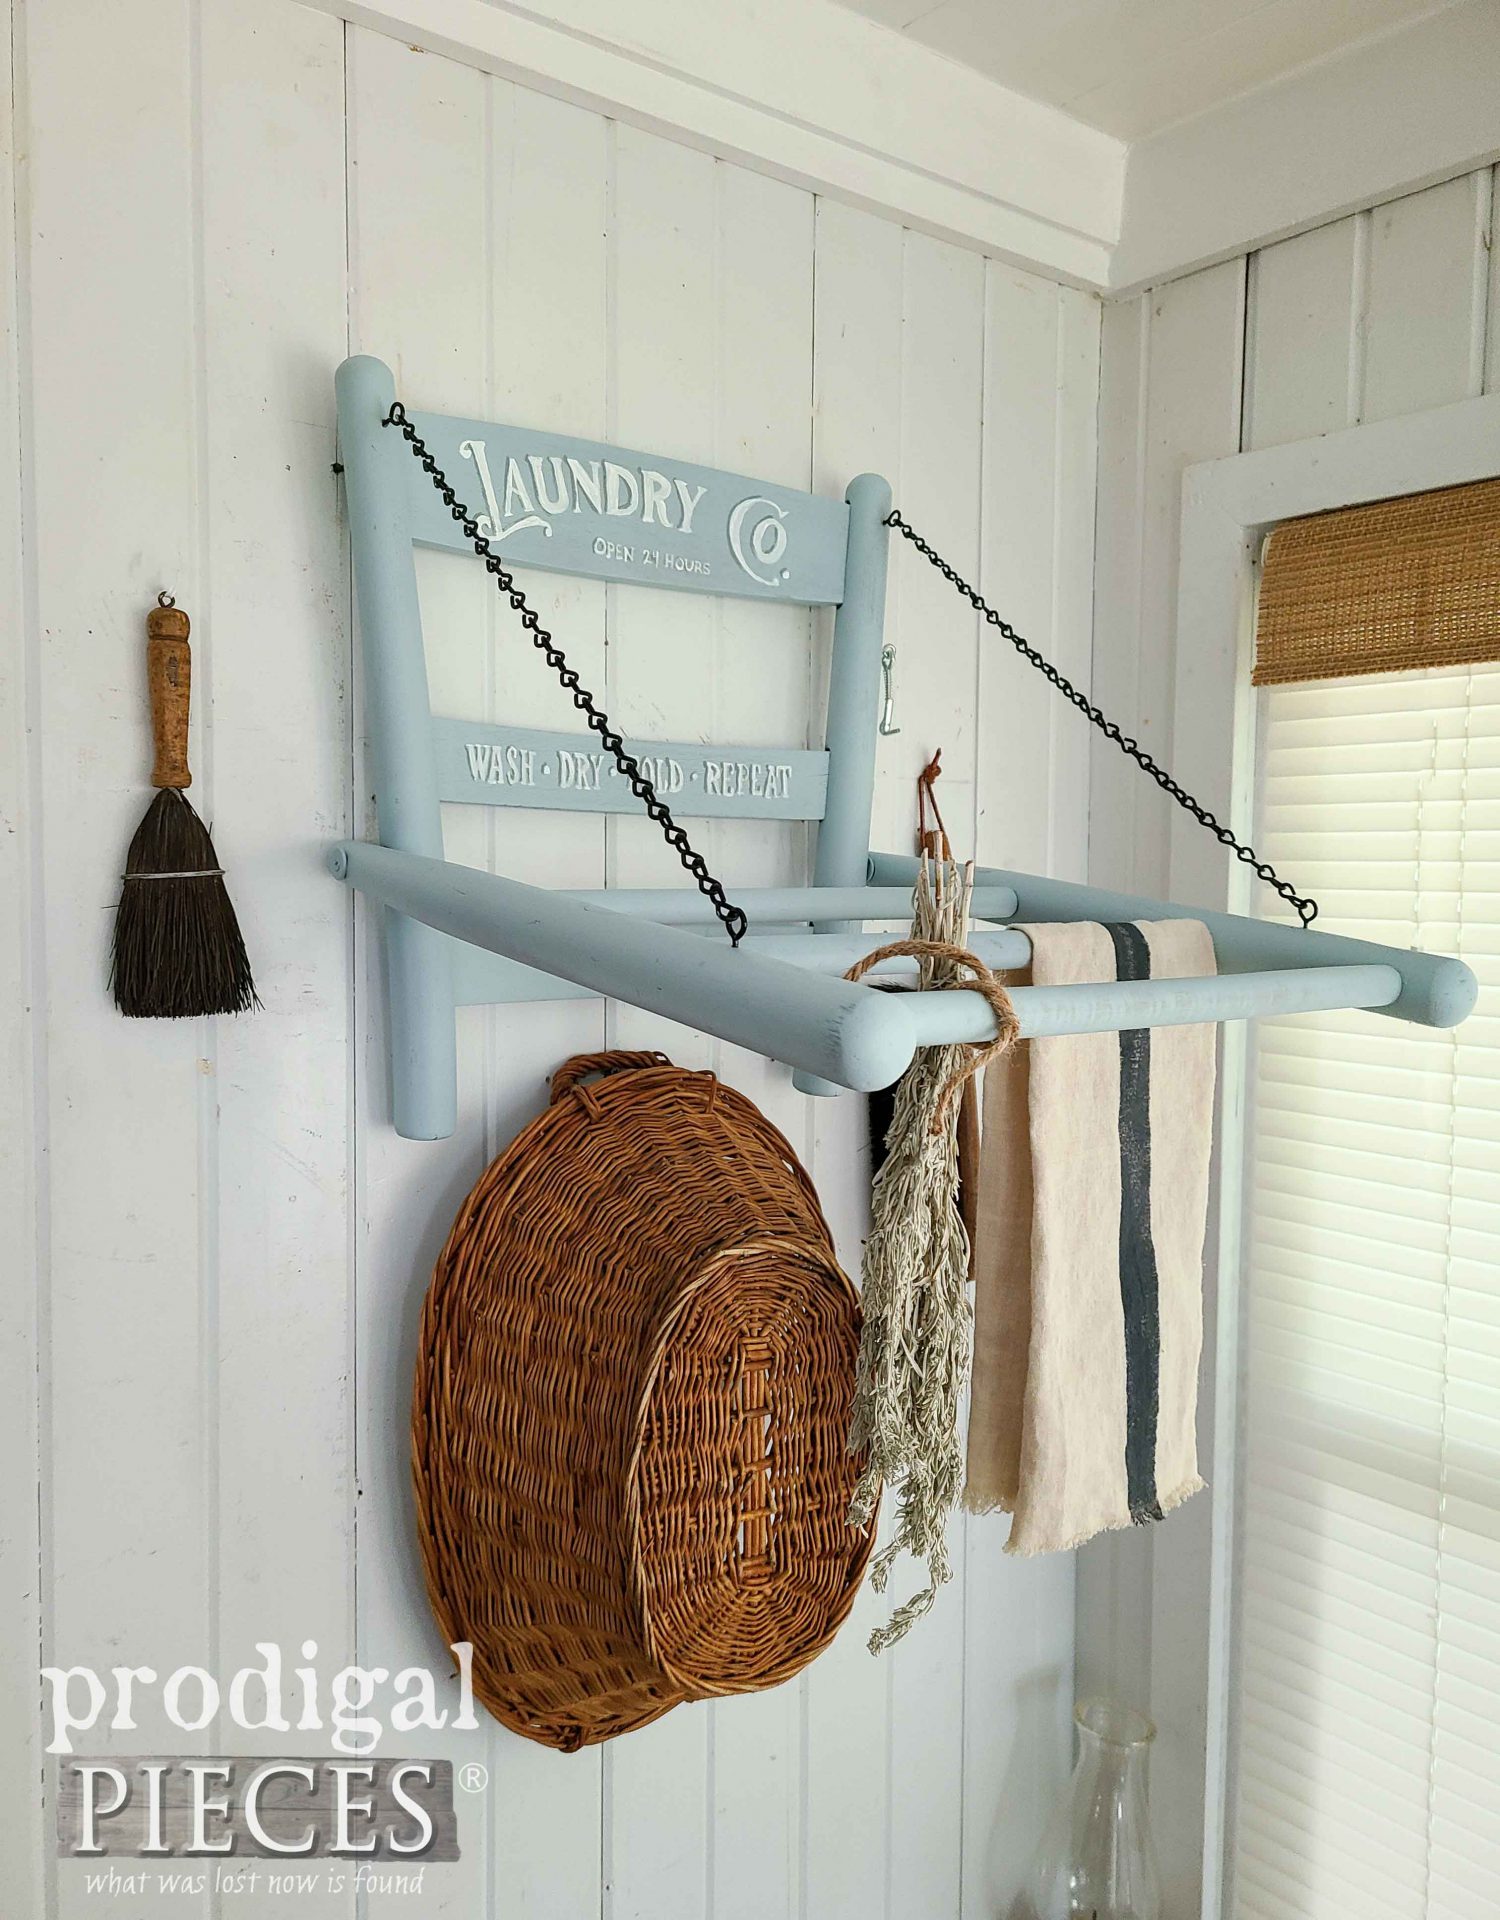 Open DIY Folding Laundry Rack from Upcycled Vintage Caned Chair by Larissa of Prodigal Pieces | prodigalpieces.com #prodigalpieces #farmhouse #diy #repuropsed